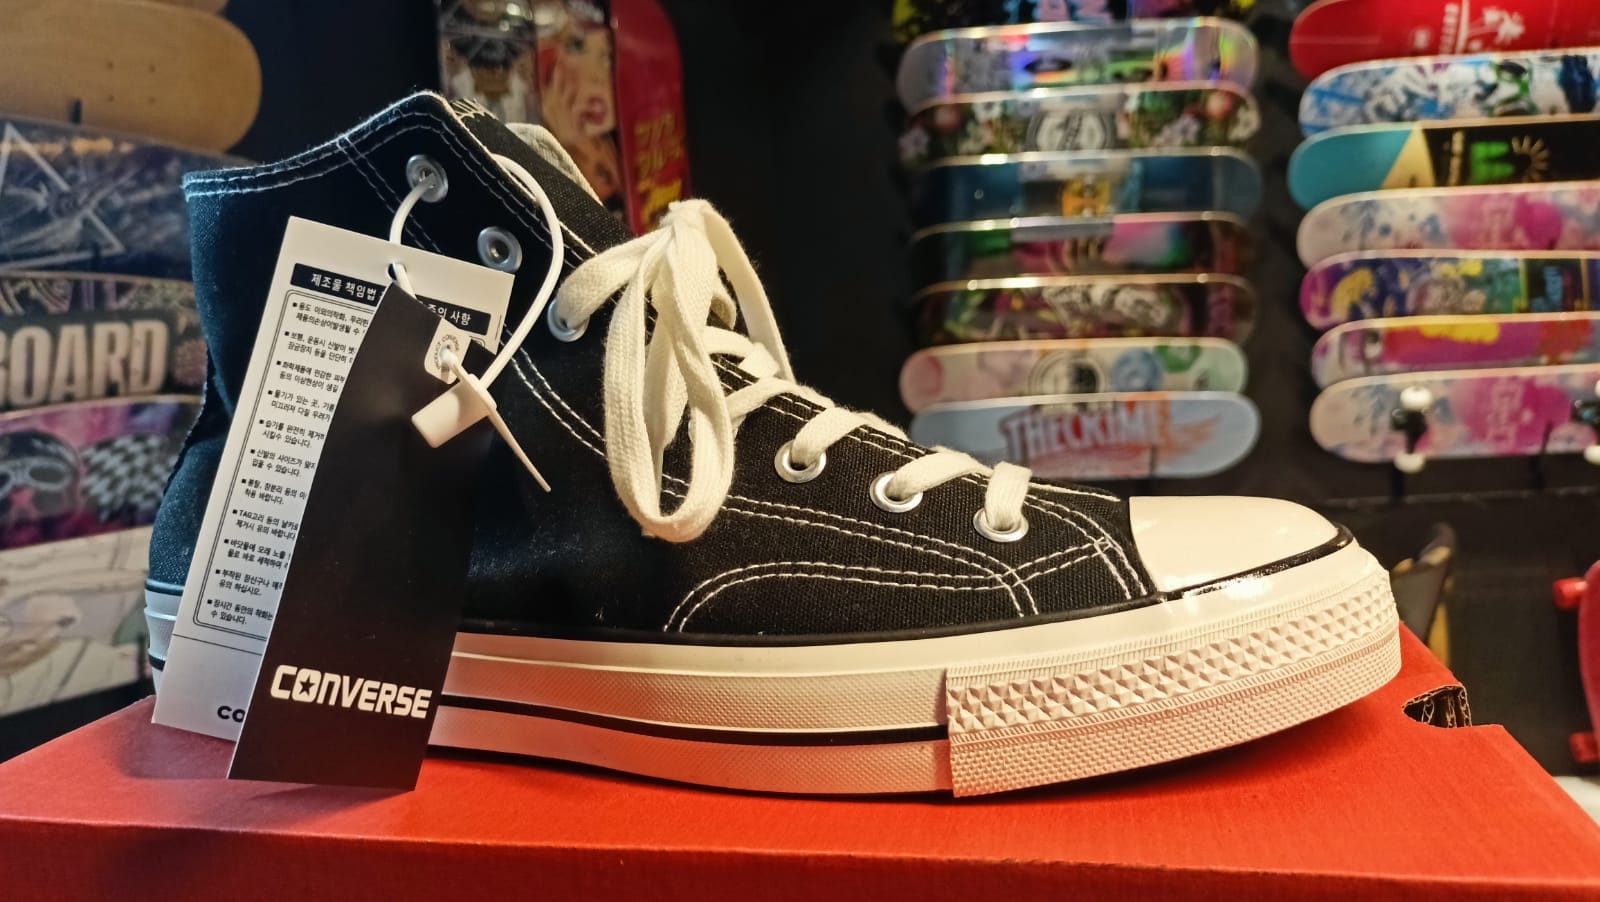 Converse All Star Skate Sneaker Review: Unfiltered Truth